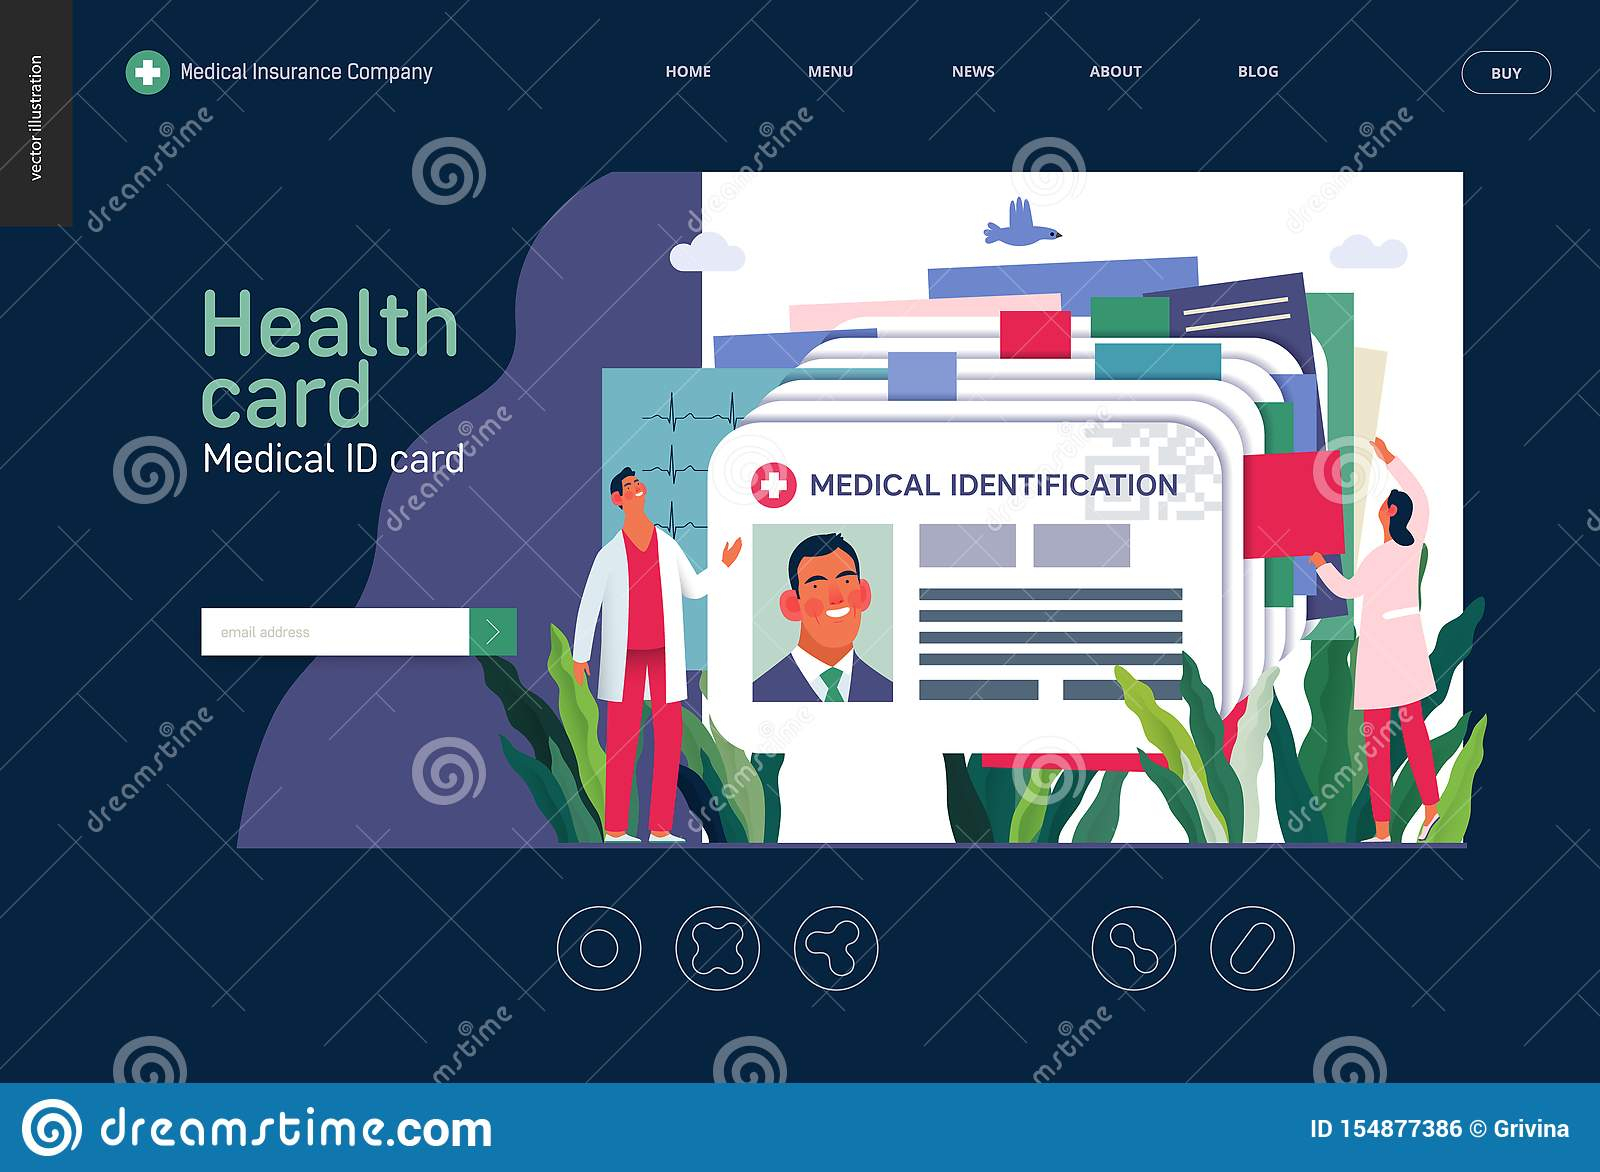 Medical Insurance Template – Medical Id Card, Health Card For Insurance Id Card Template